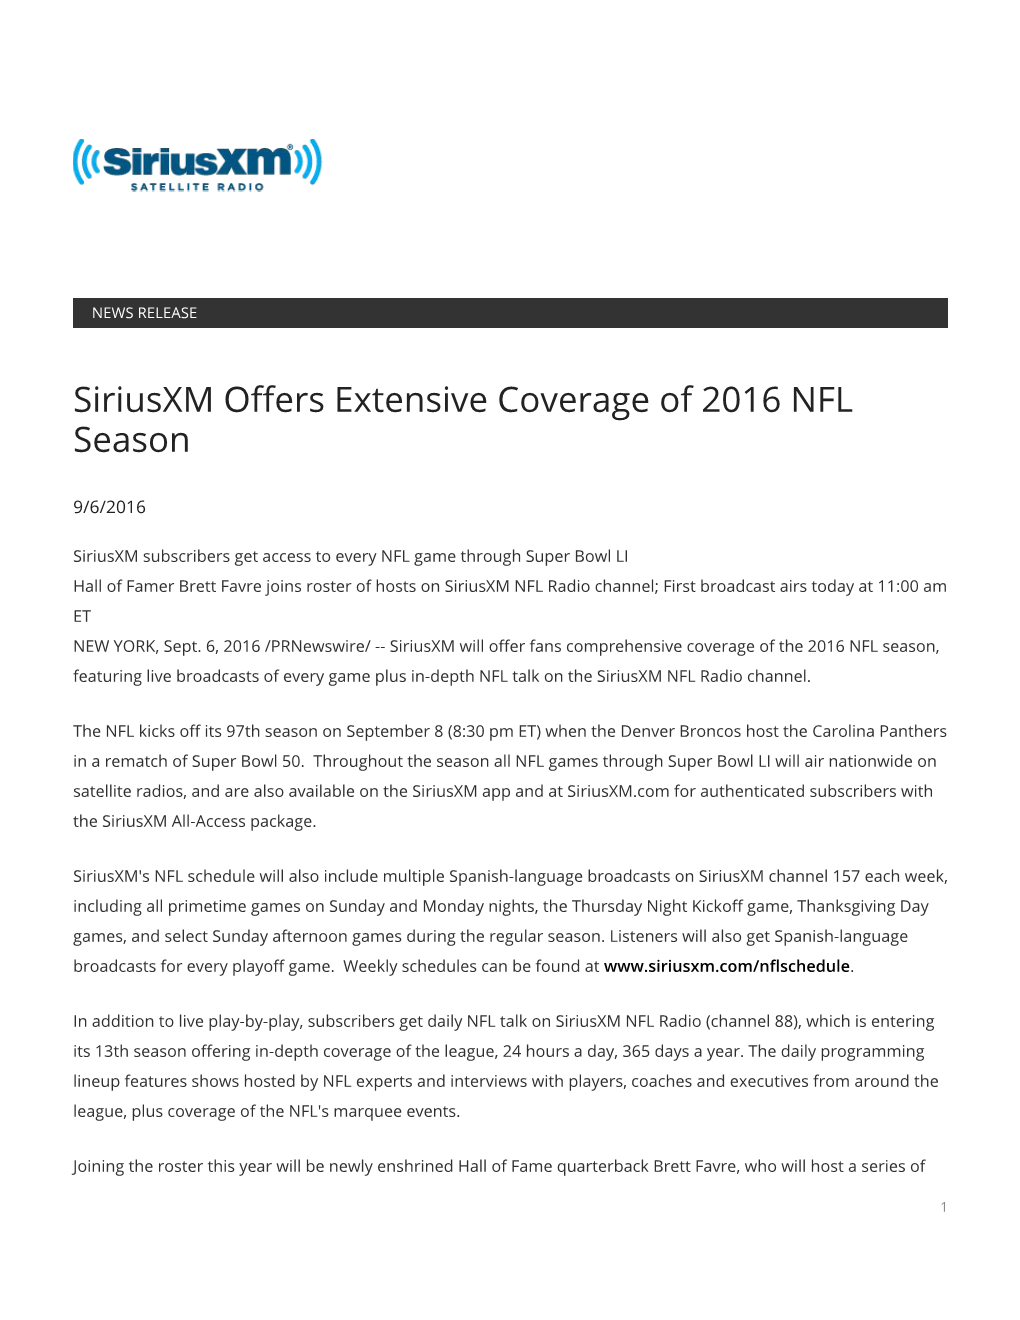 Siriusxm Offers Extensive Coverage of 2016 NFL Season